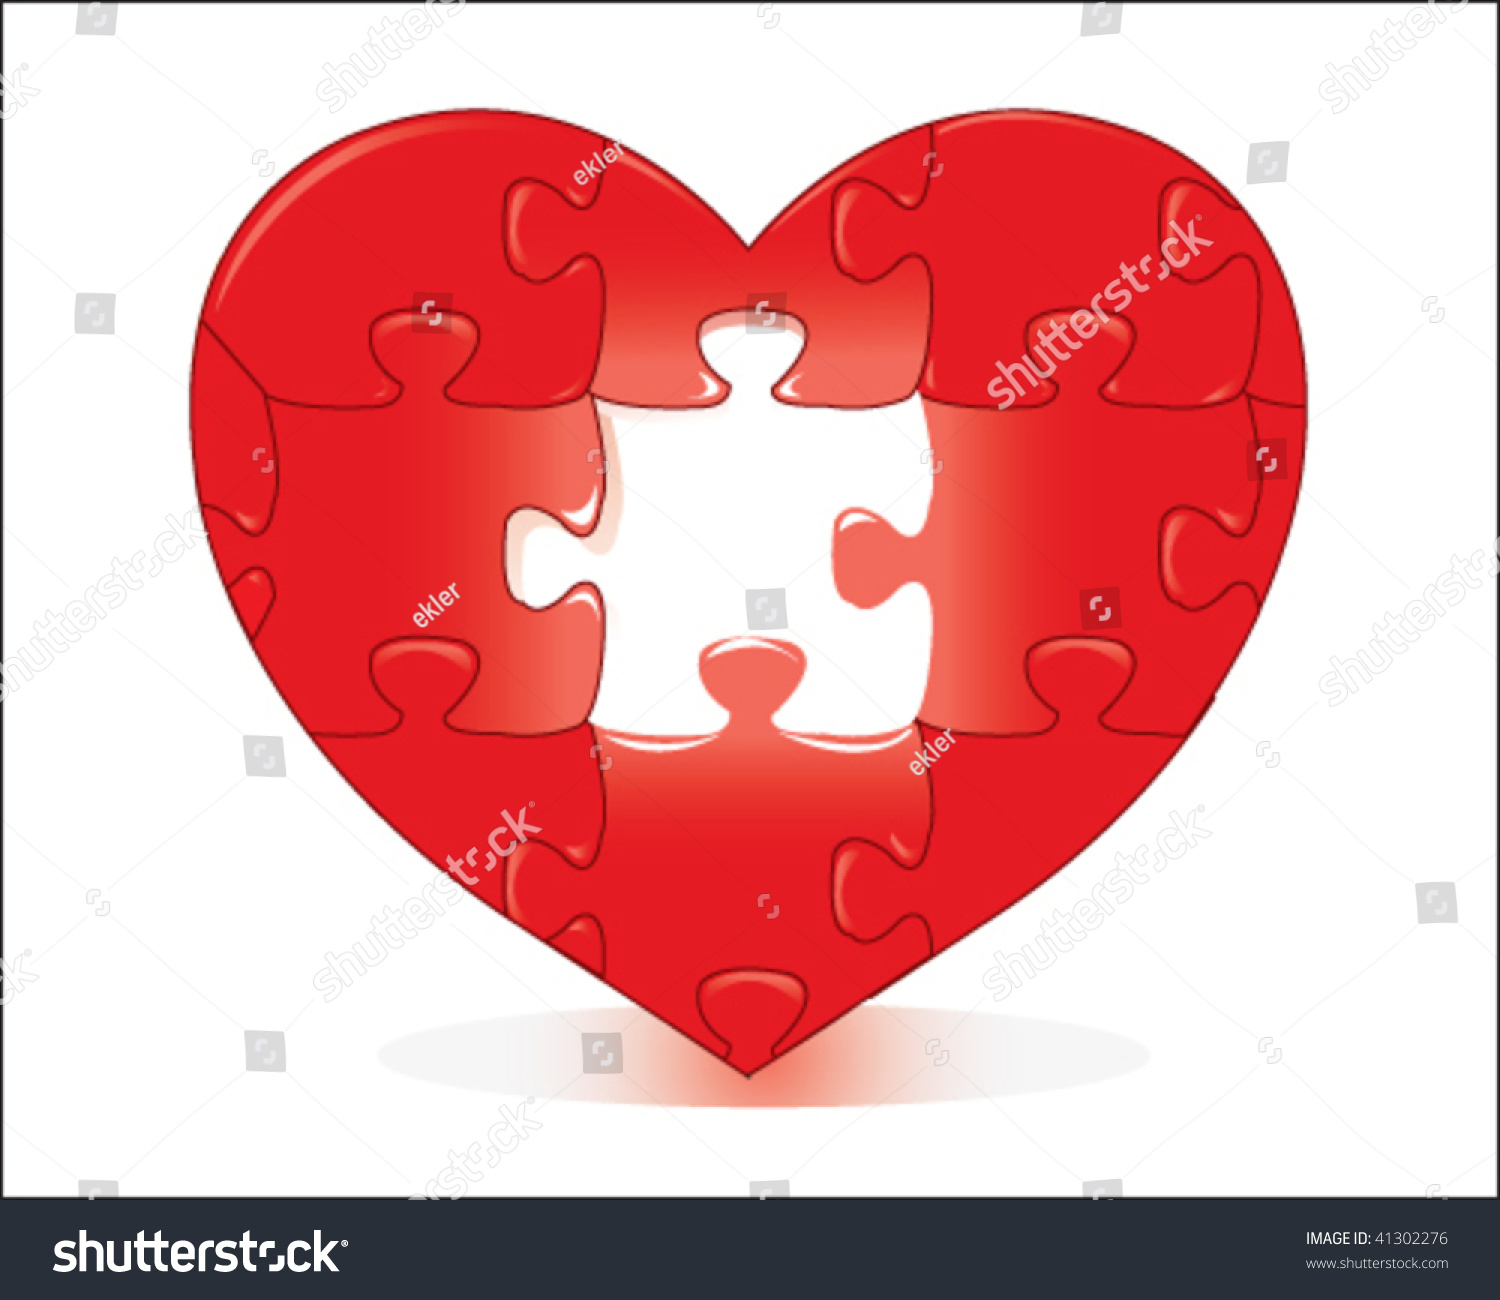 Heart Puzzle With Missing Piece Stock Vector Illustration 41302276 ...